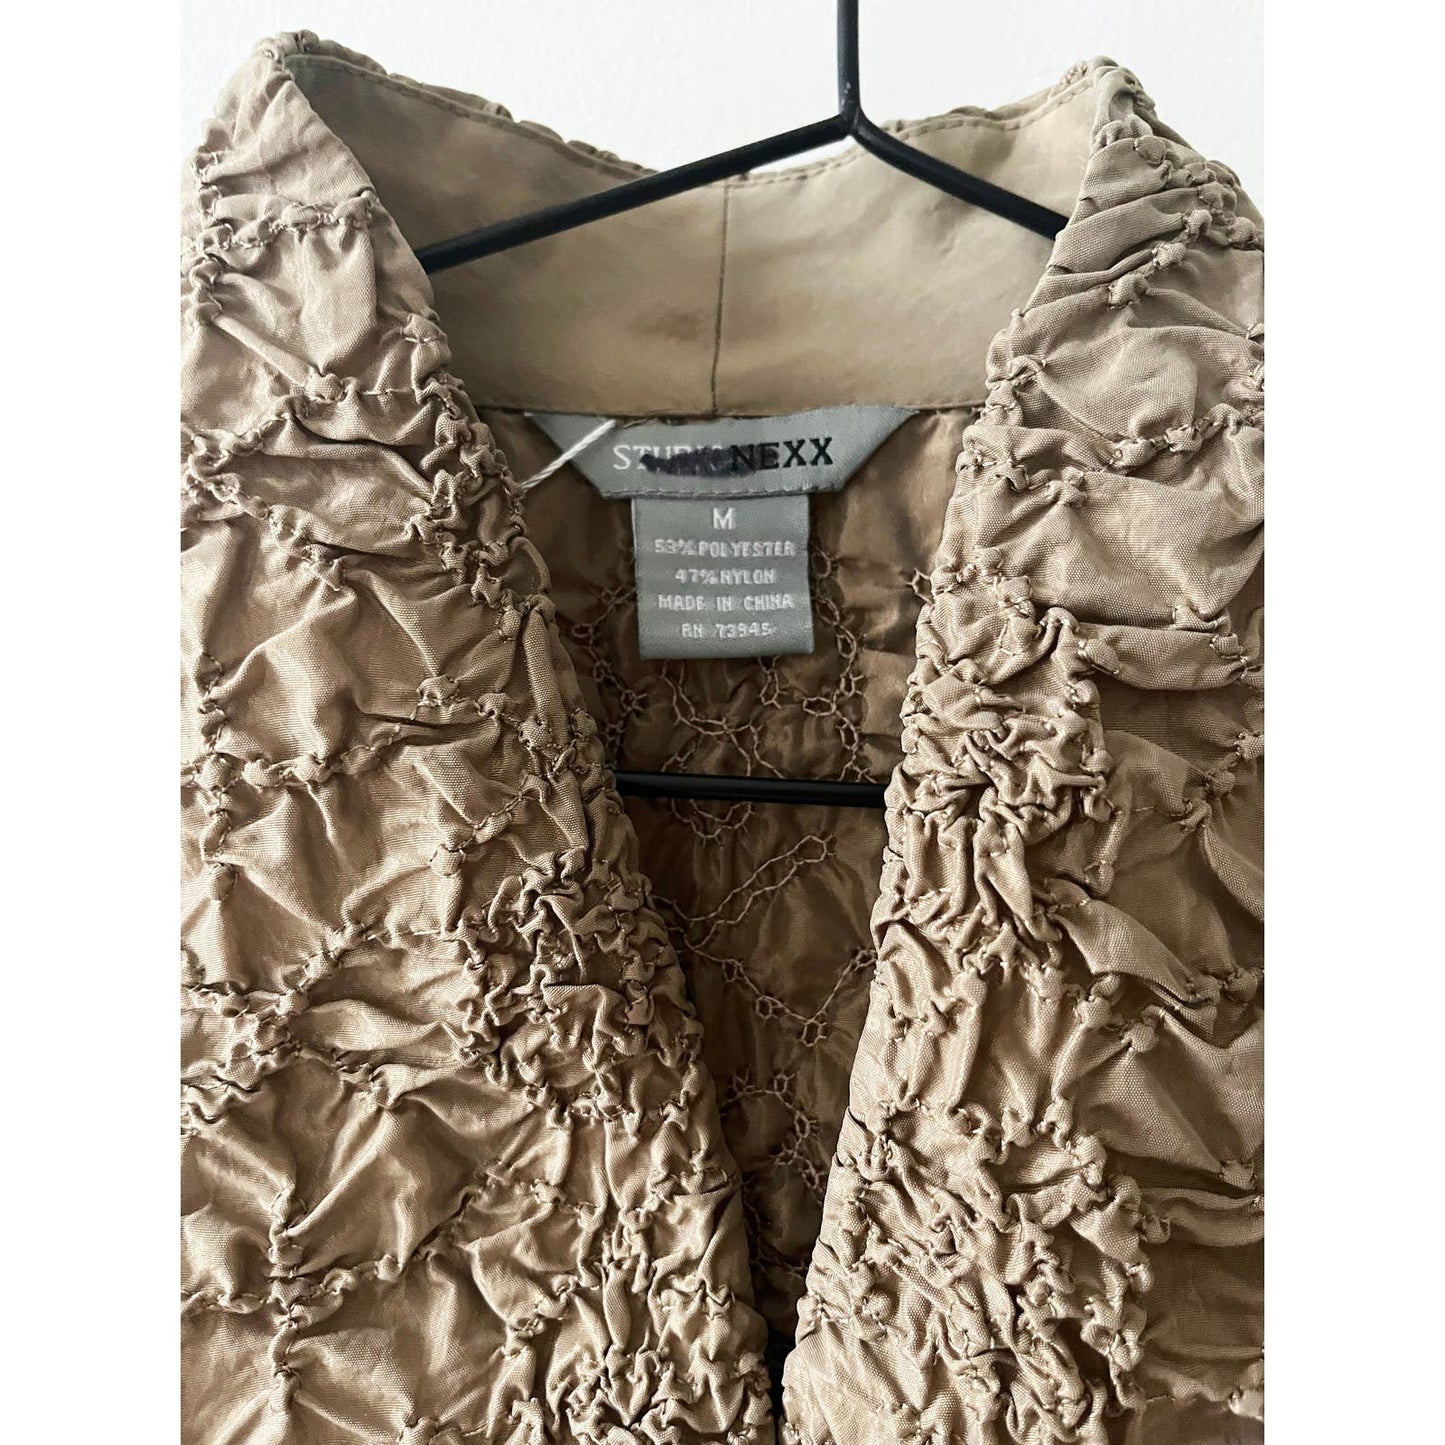 Vintage Gold Popcorn Jacket with Bell Sleeves